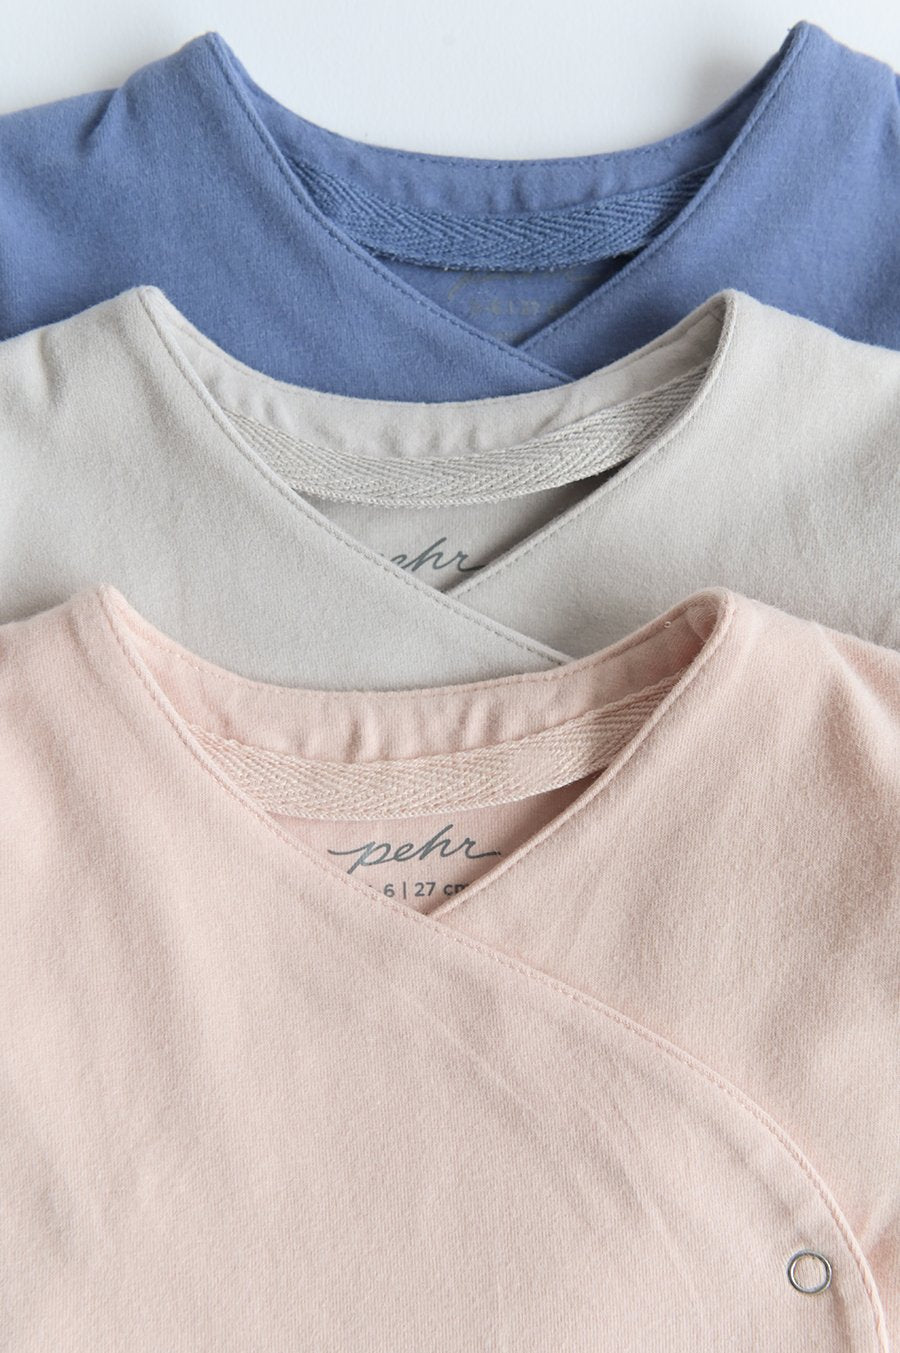 Pehr Essentials Wrap Cardigans in Powder Pink, Dove Grey, and Cloud blue layered on top of each other. GOTS Certified Organic Cotton & Dyes.